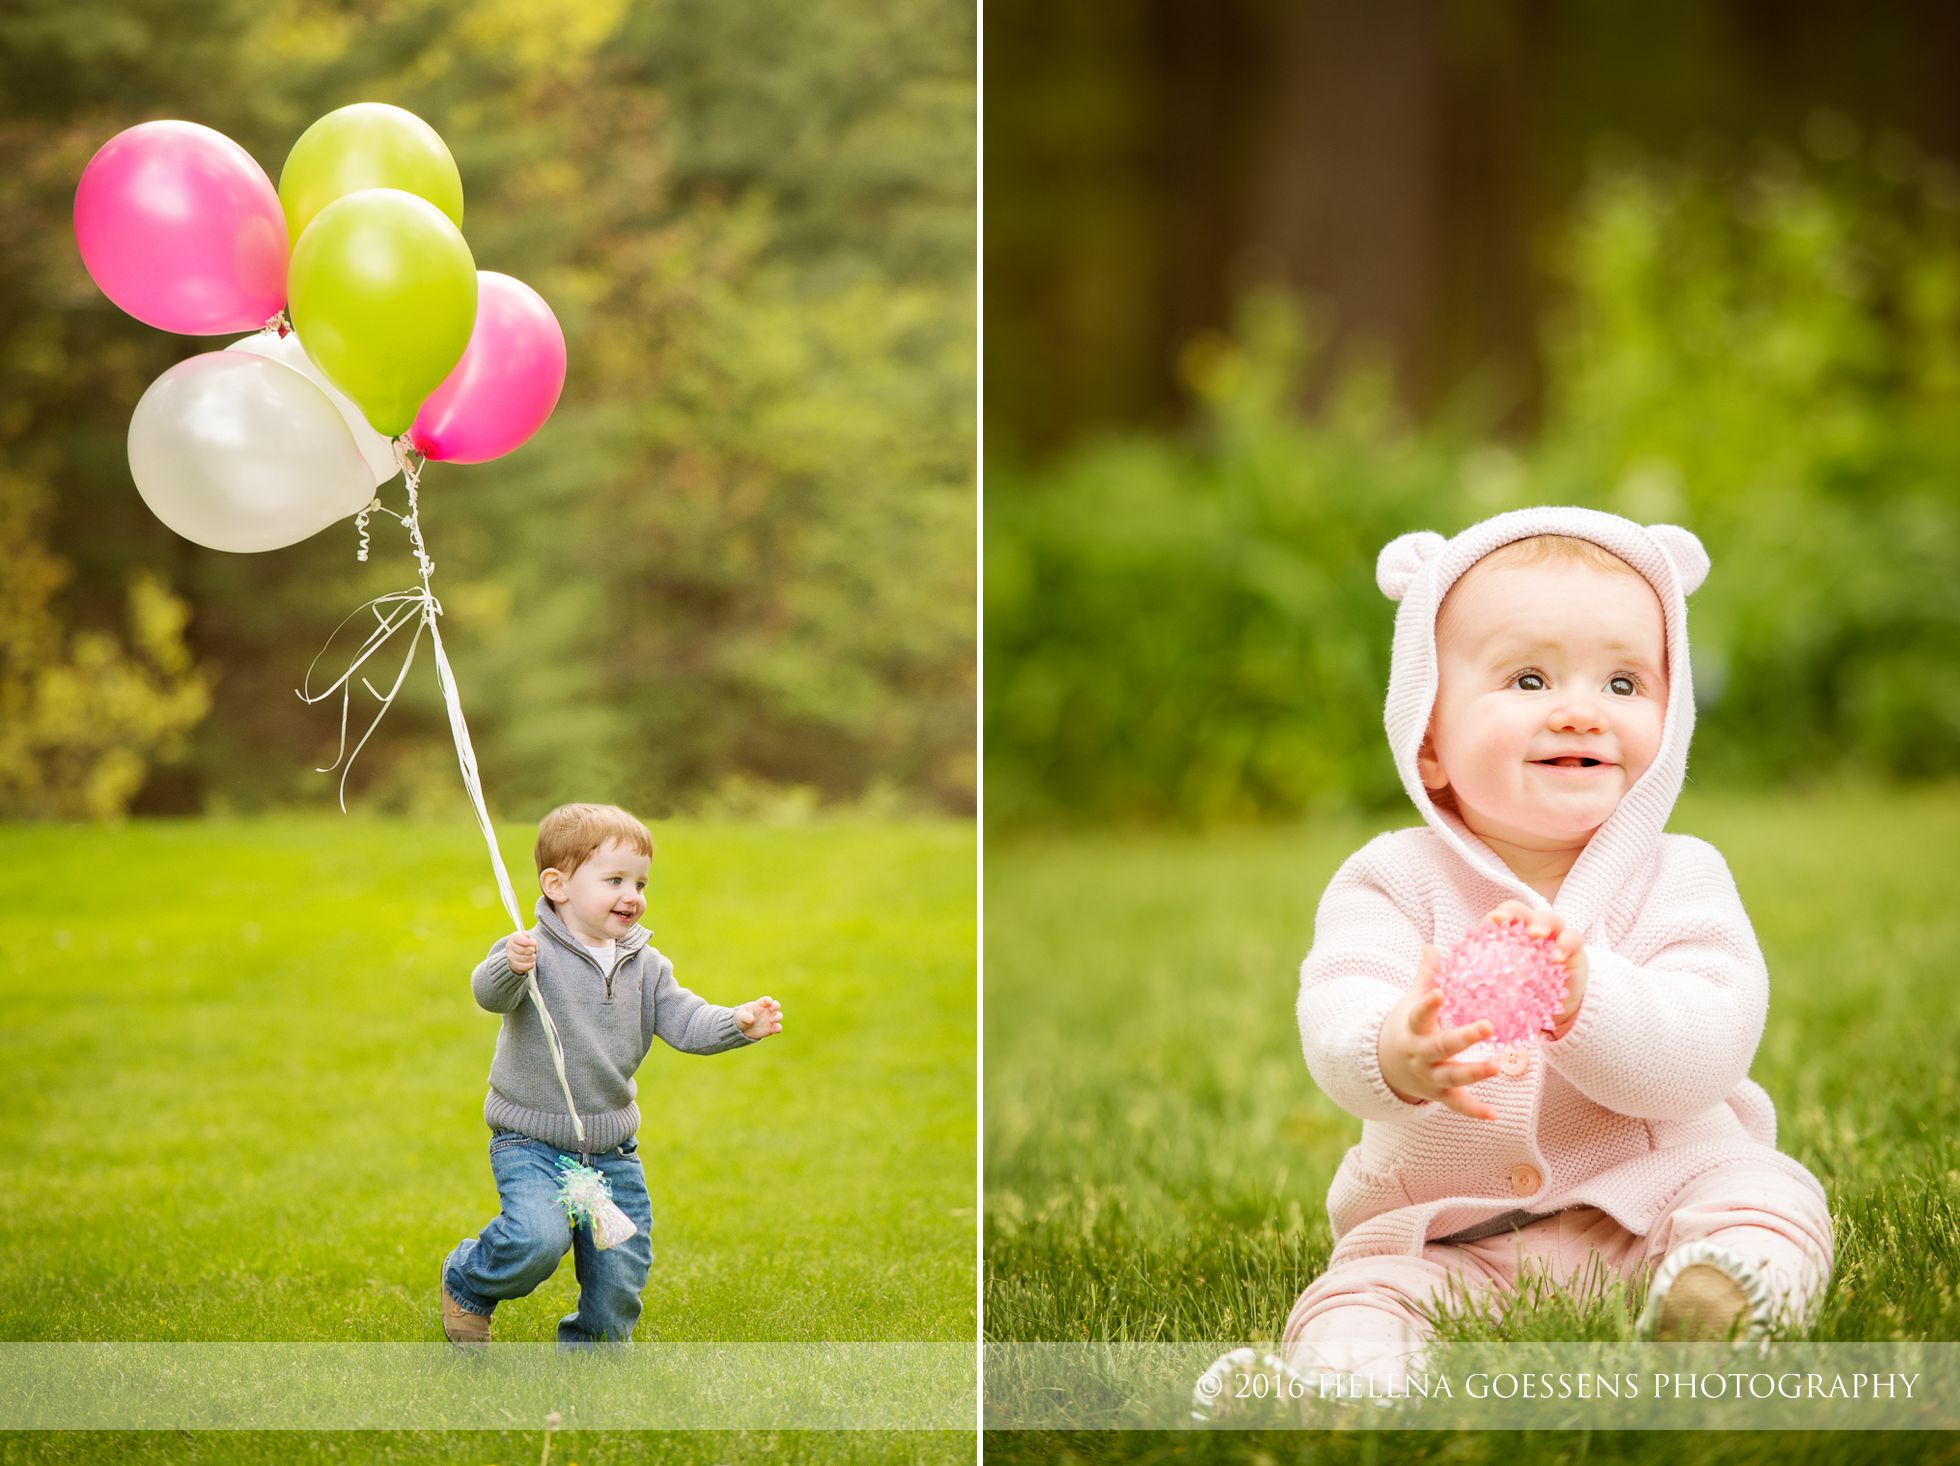 a toddler running with balloons in his hand and a baby girl sitting with a pink swweater